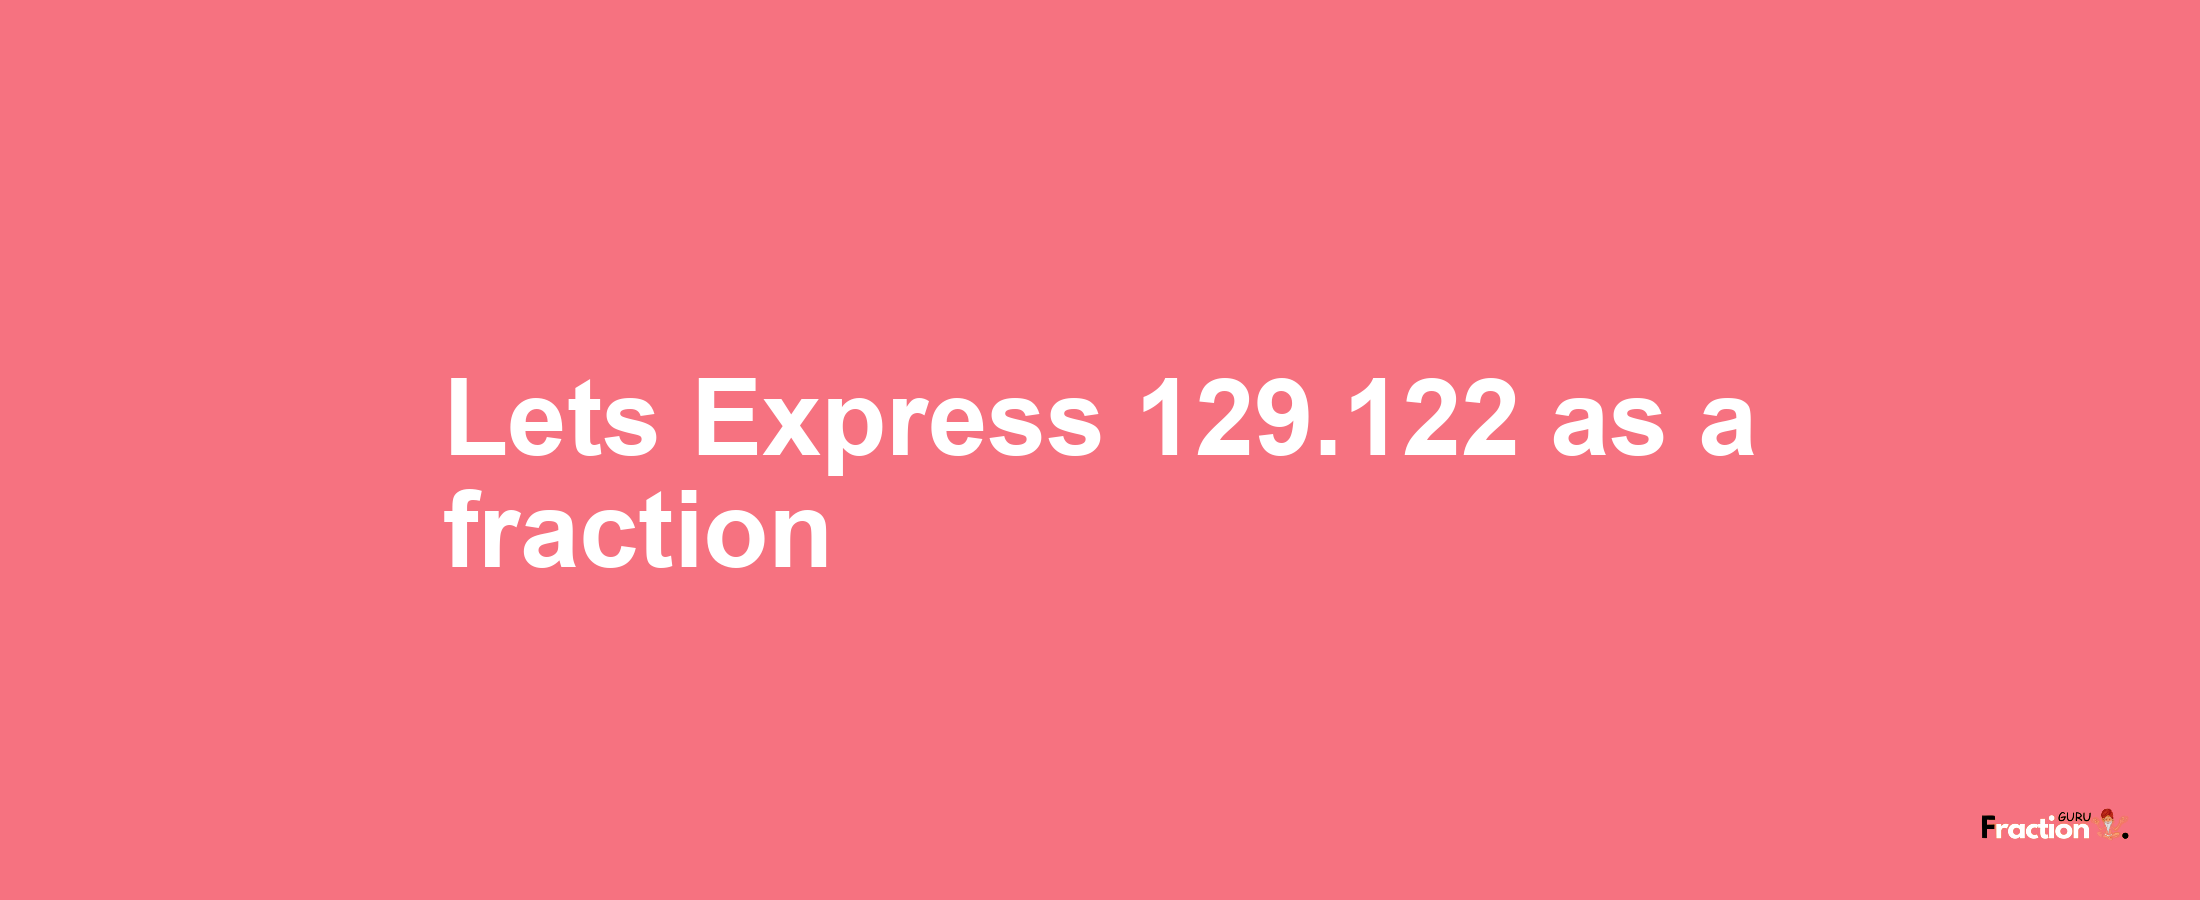 Lets Express 129.122 as afraction